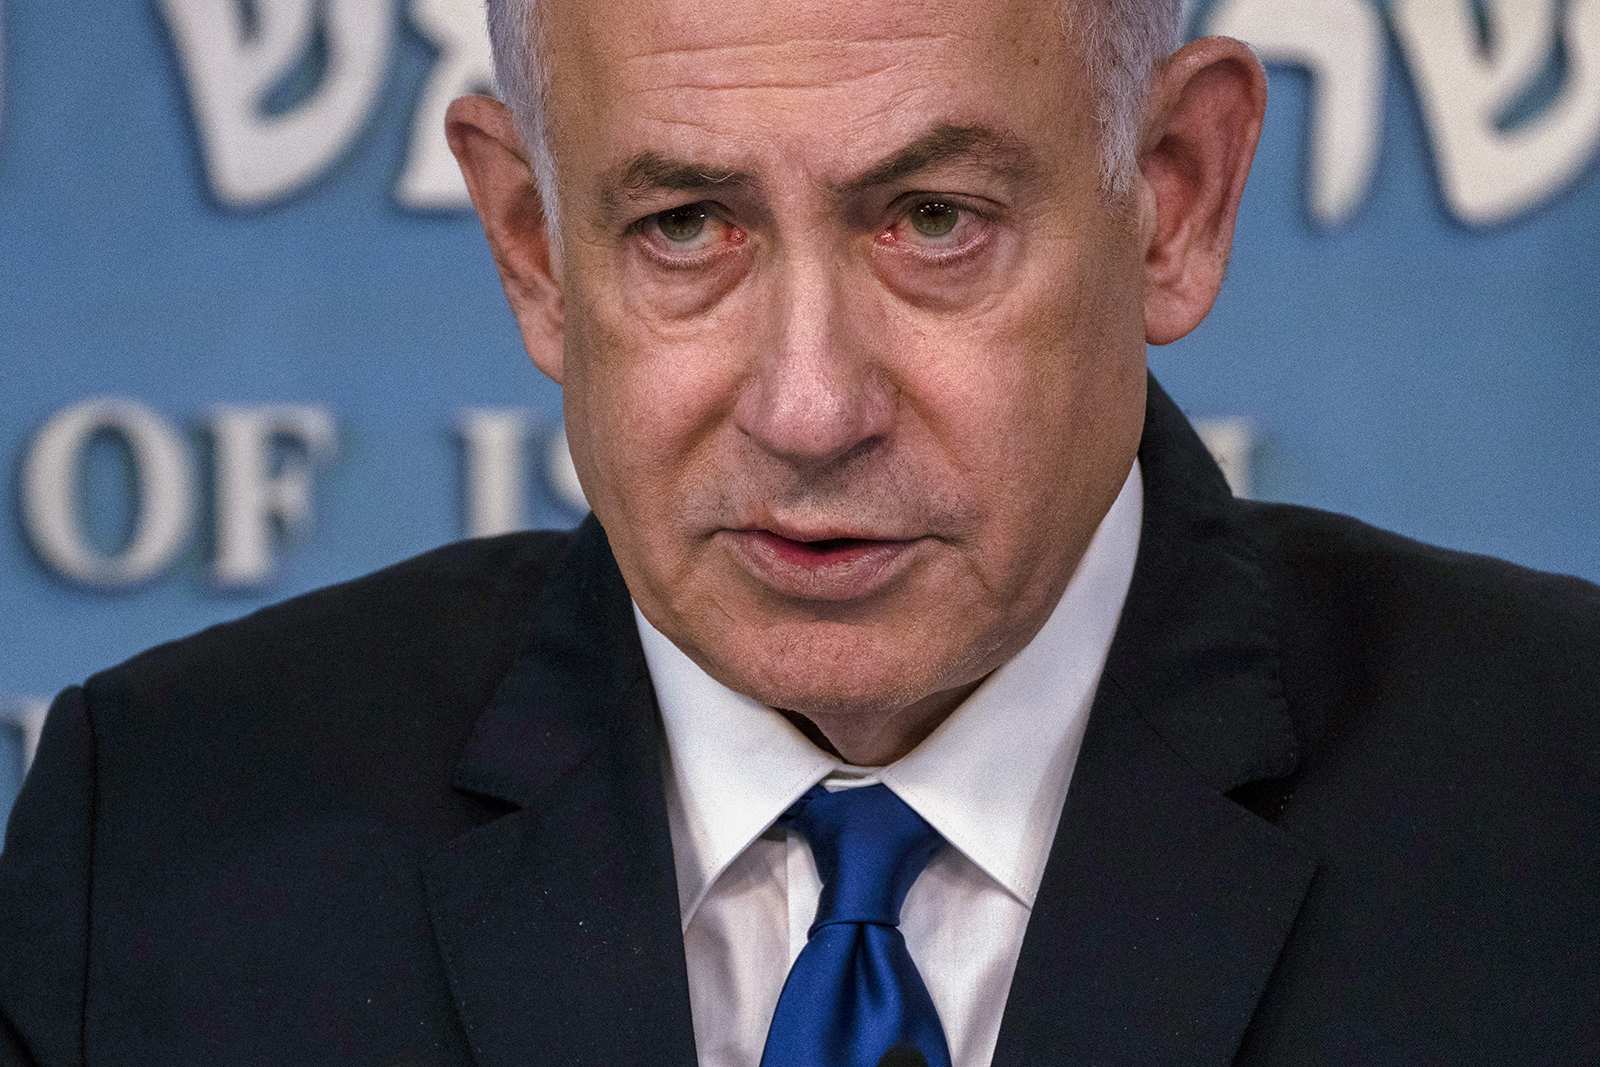 Israel vows response to Iran as US and allies urge restraint